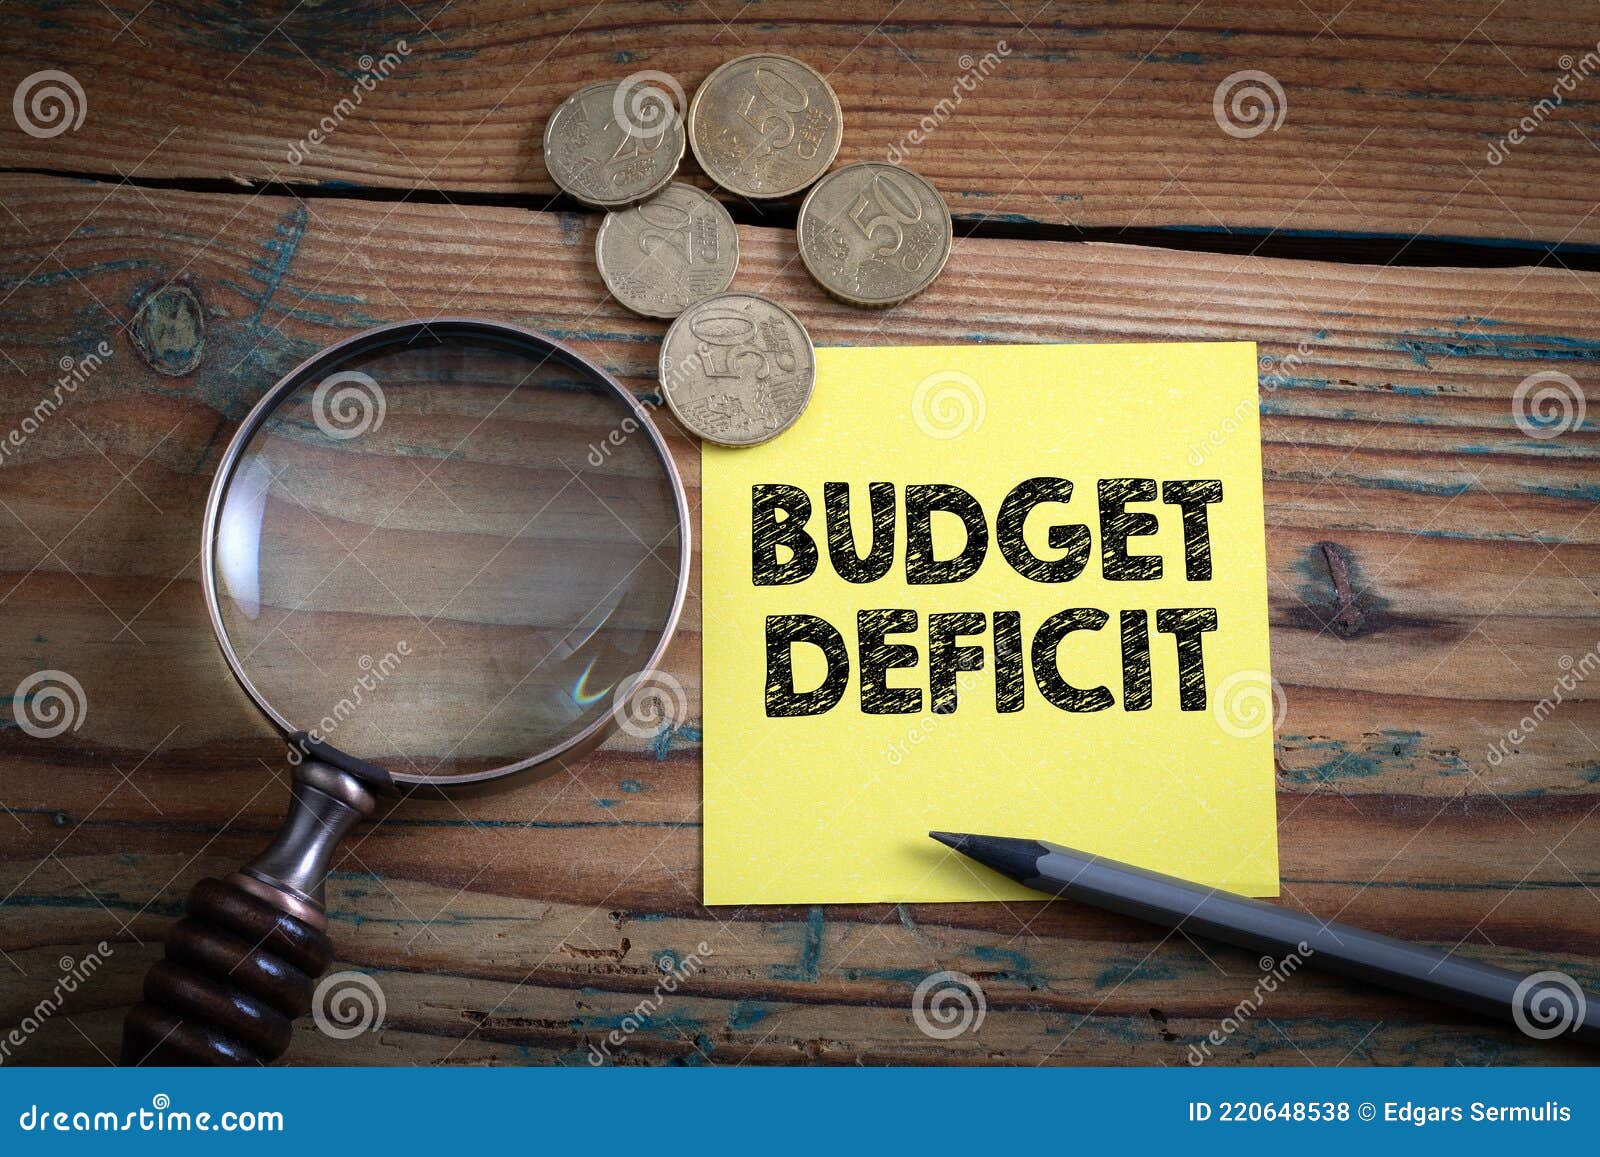 budget deficit. euro cash and magnifying glass on a wooden background